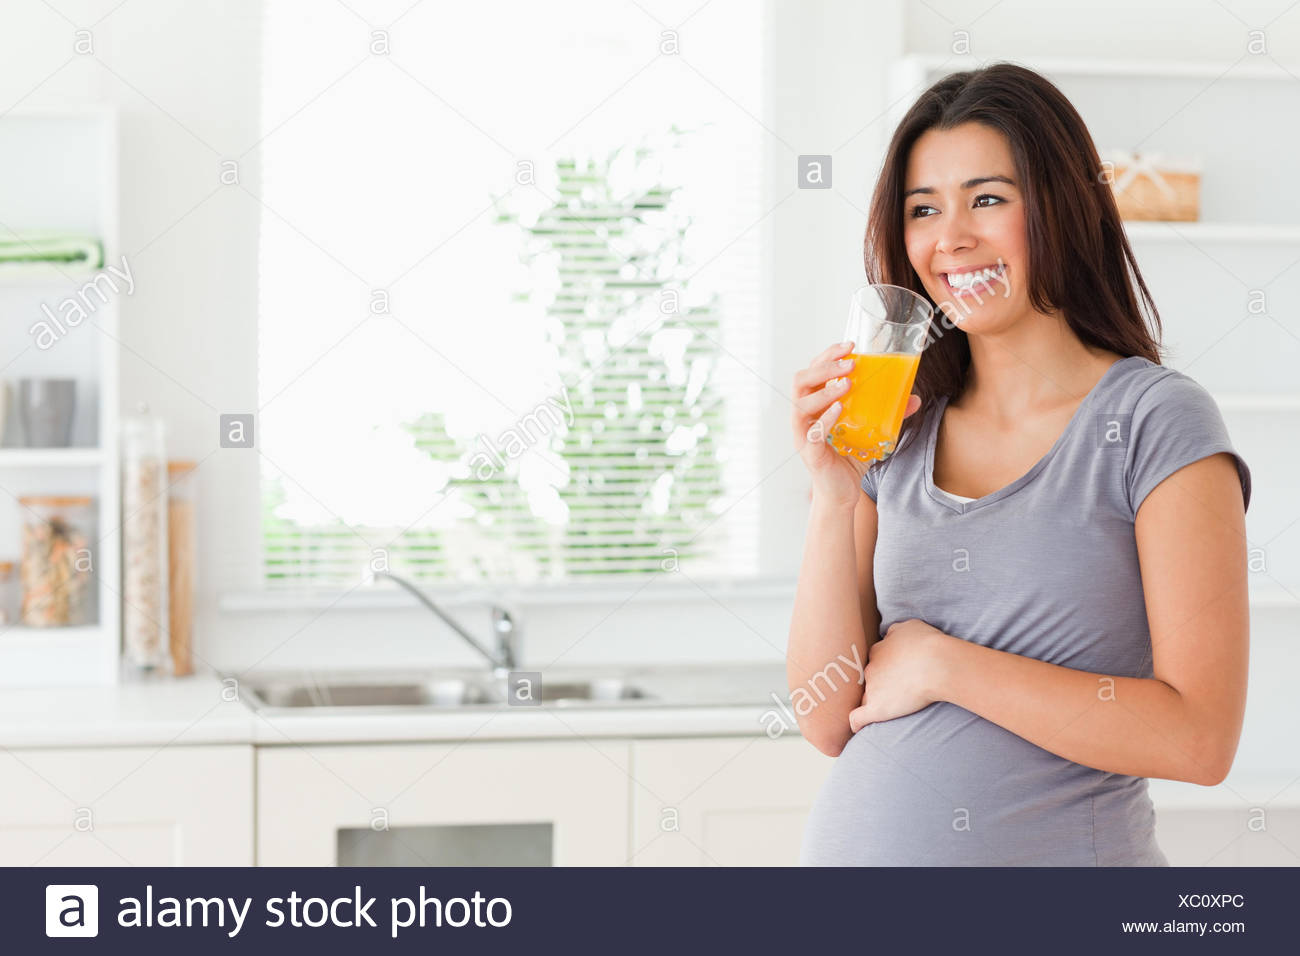 Good looking pregnant woman drinking a glass of orange juice while ...